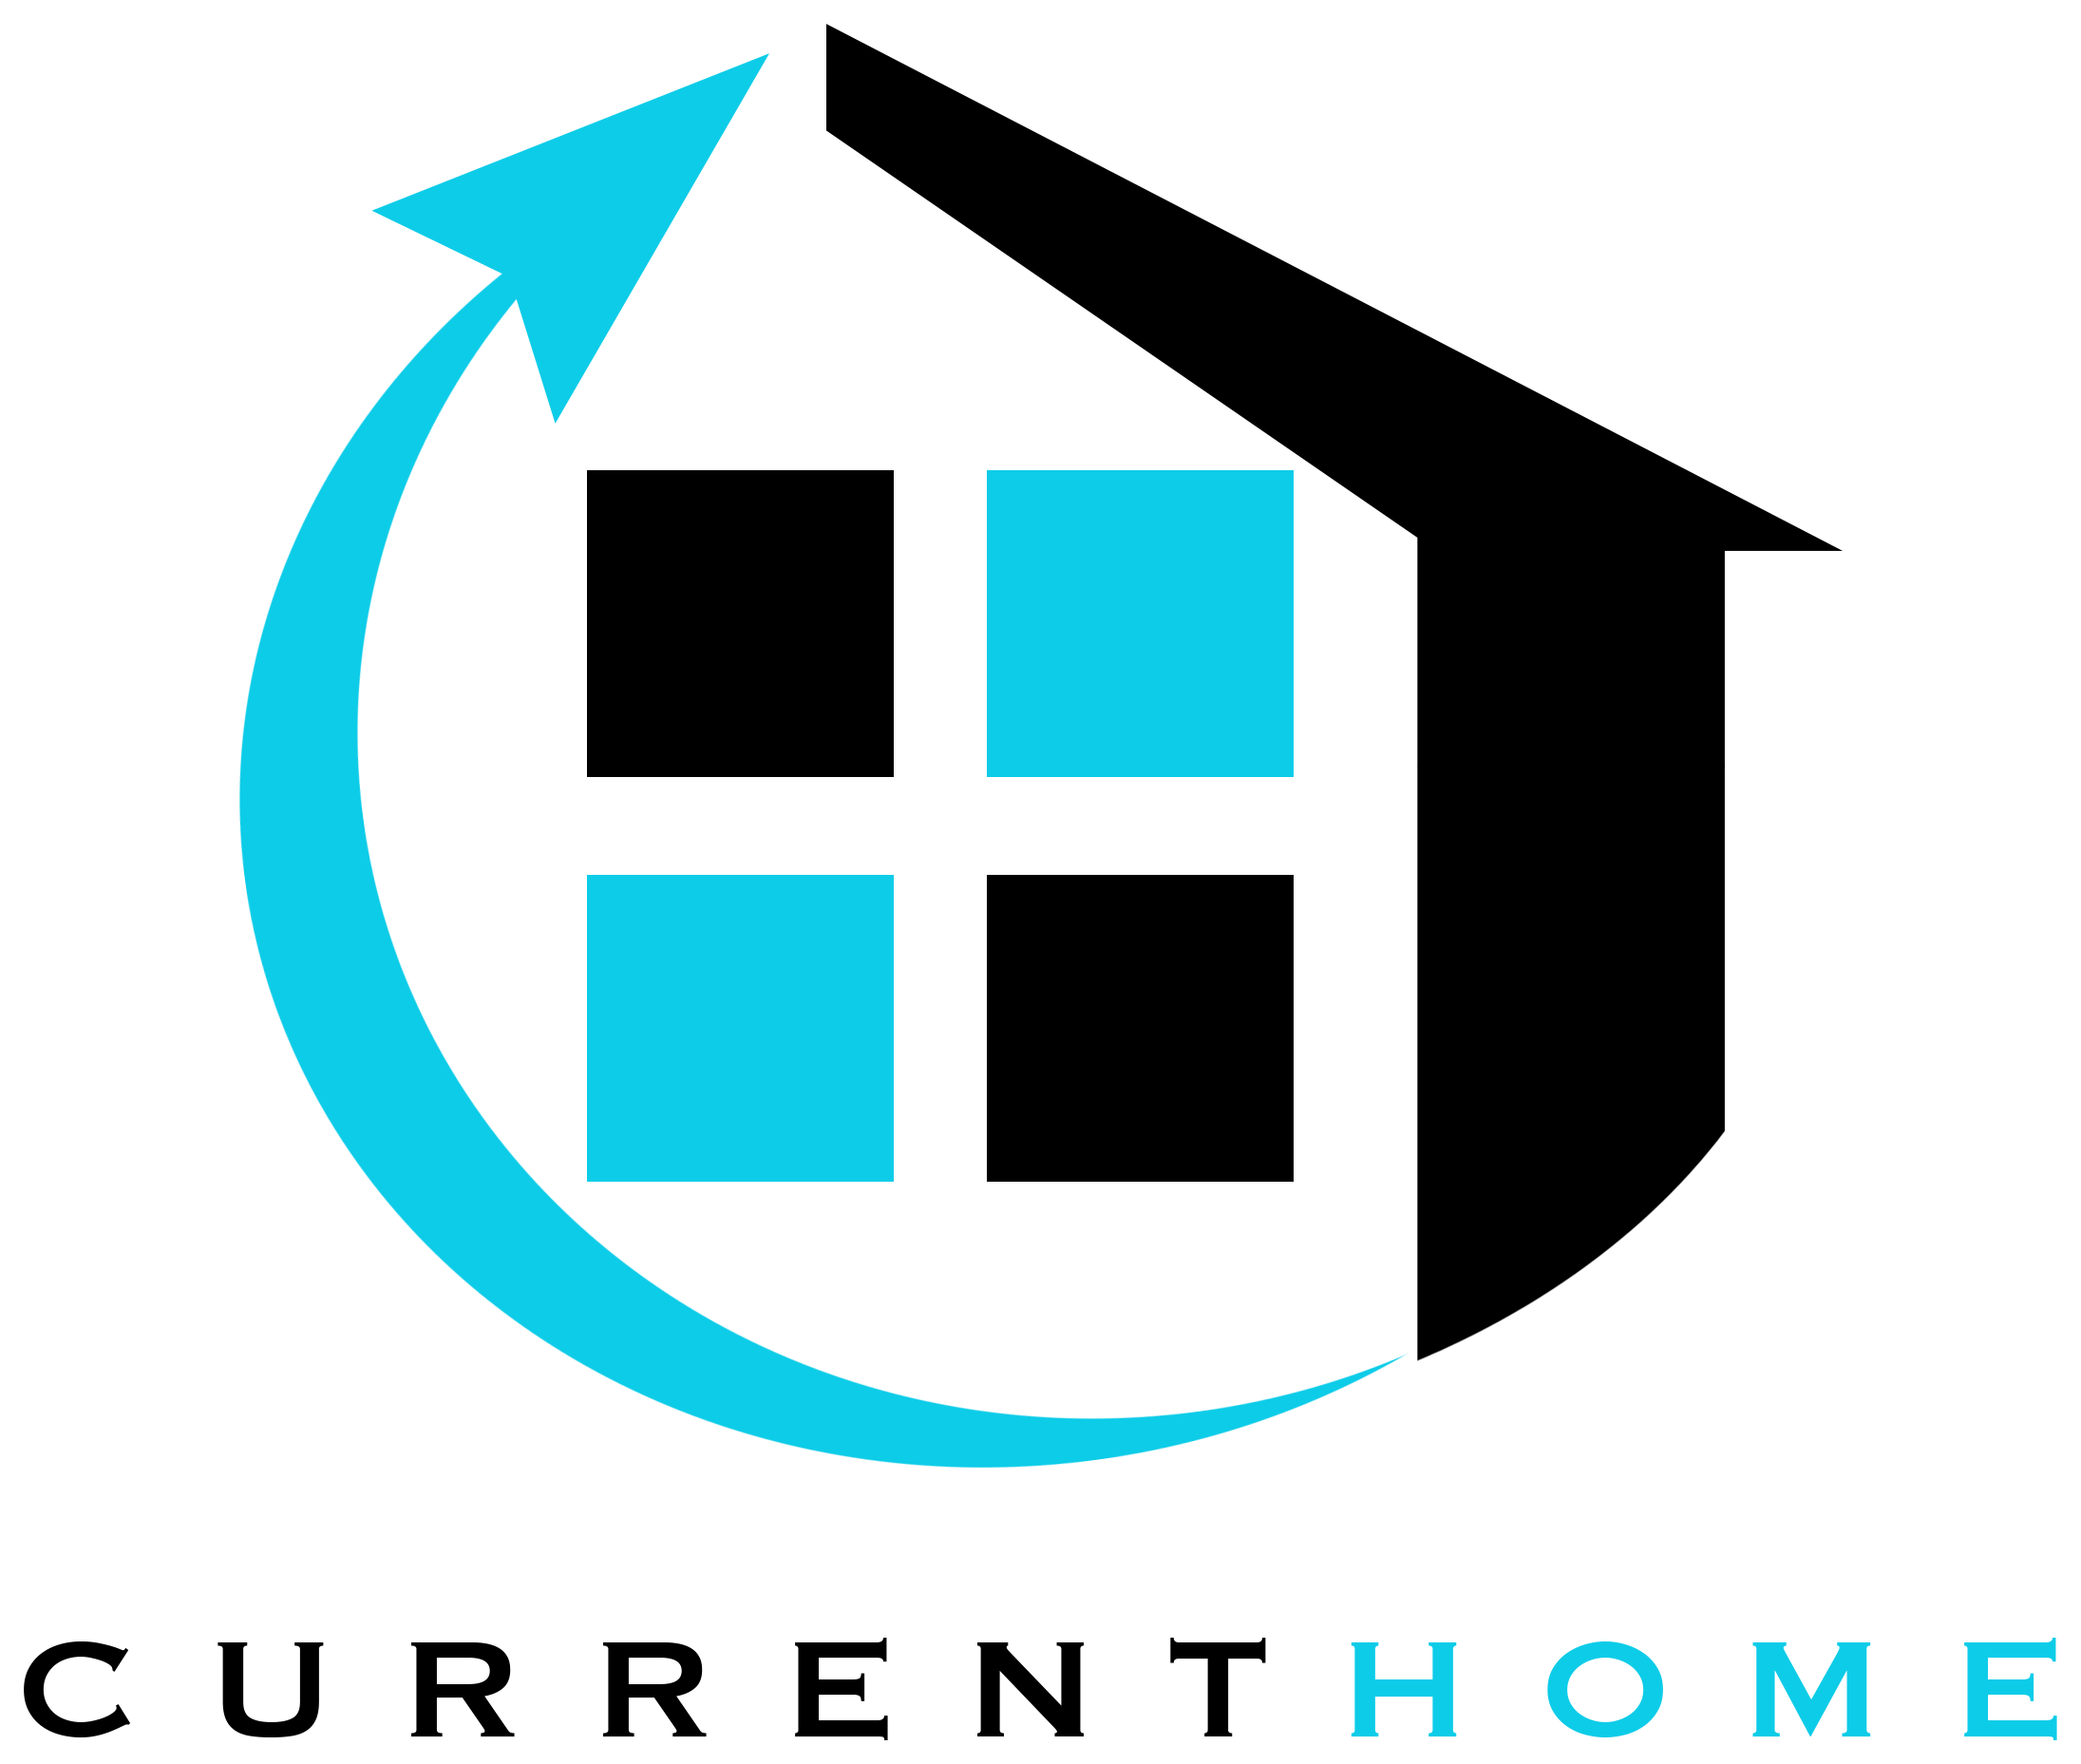 Current Home logo